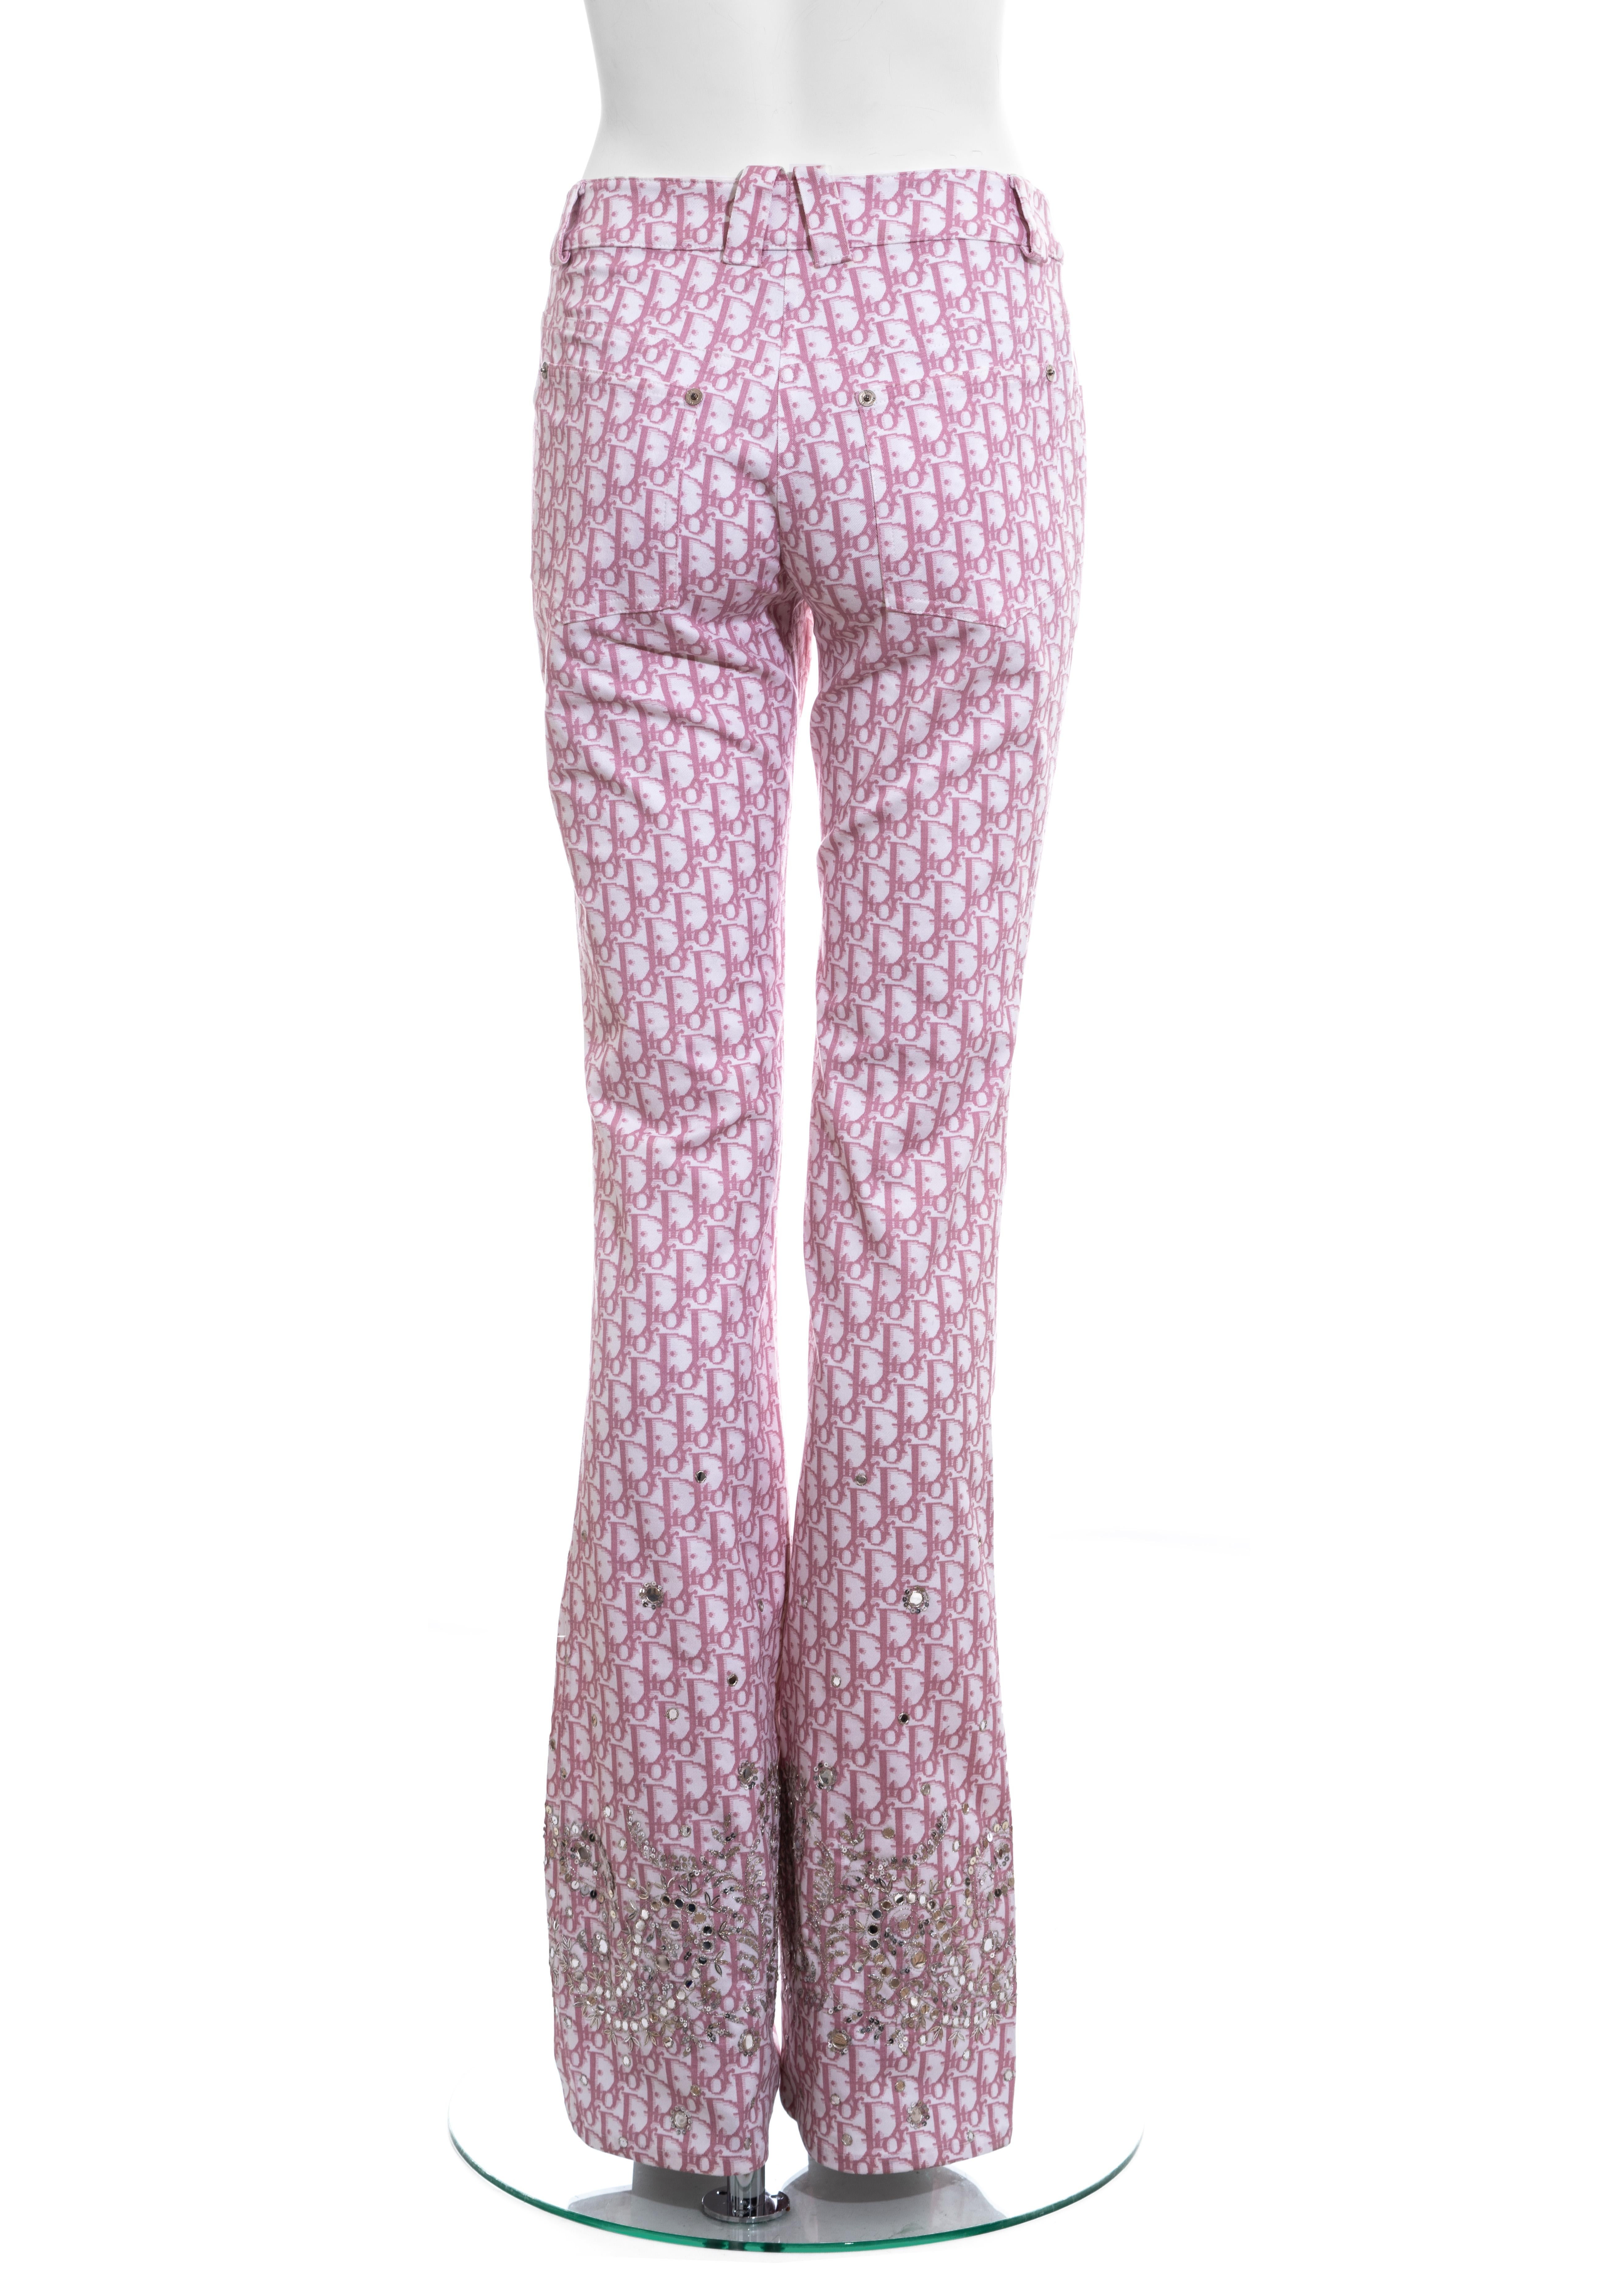 Gray Christian Dior by John Galliano baby pink monogram embellished pants, ss 2004